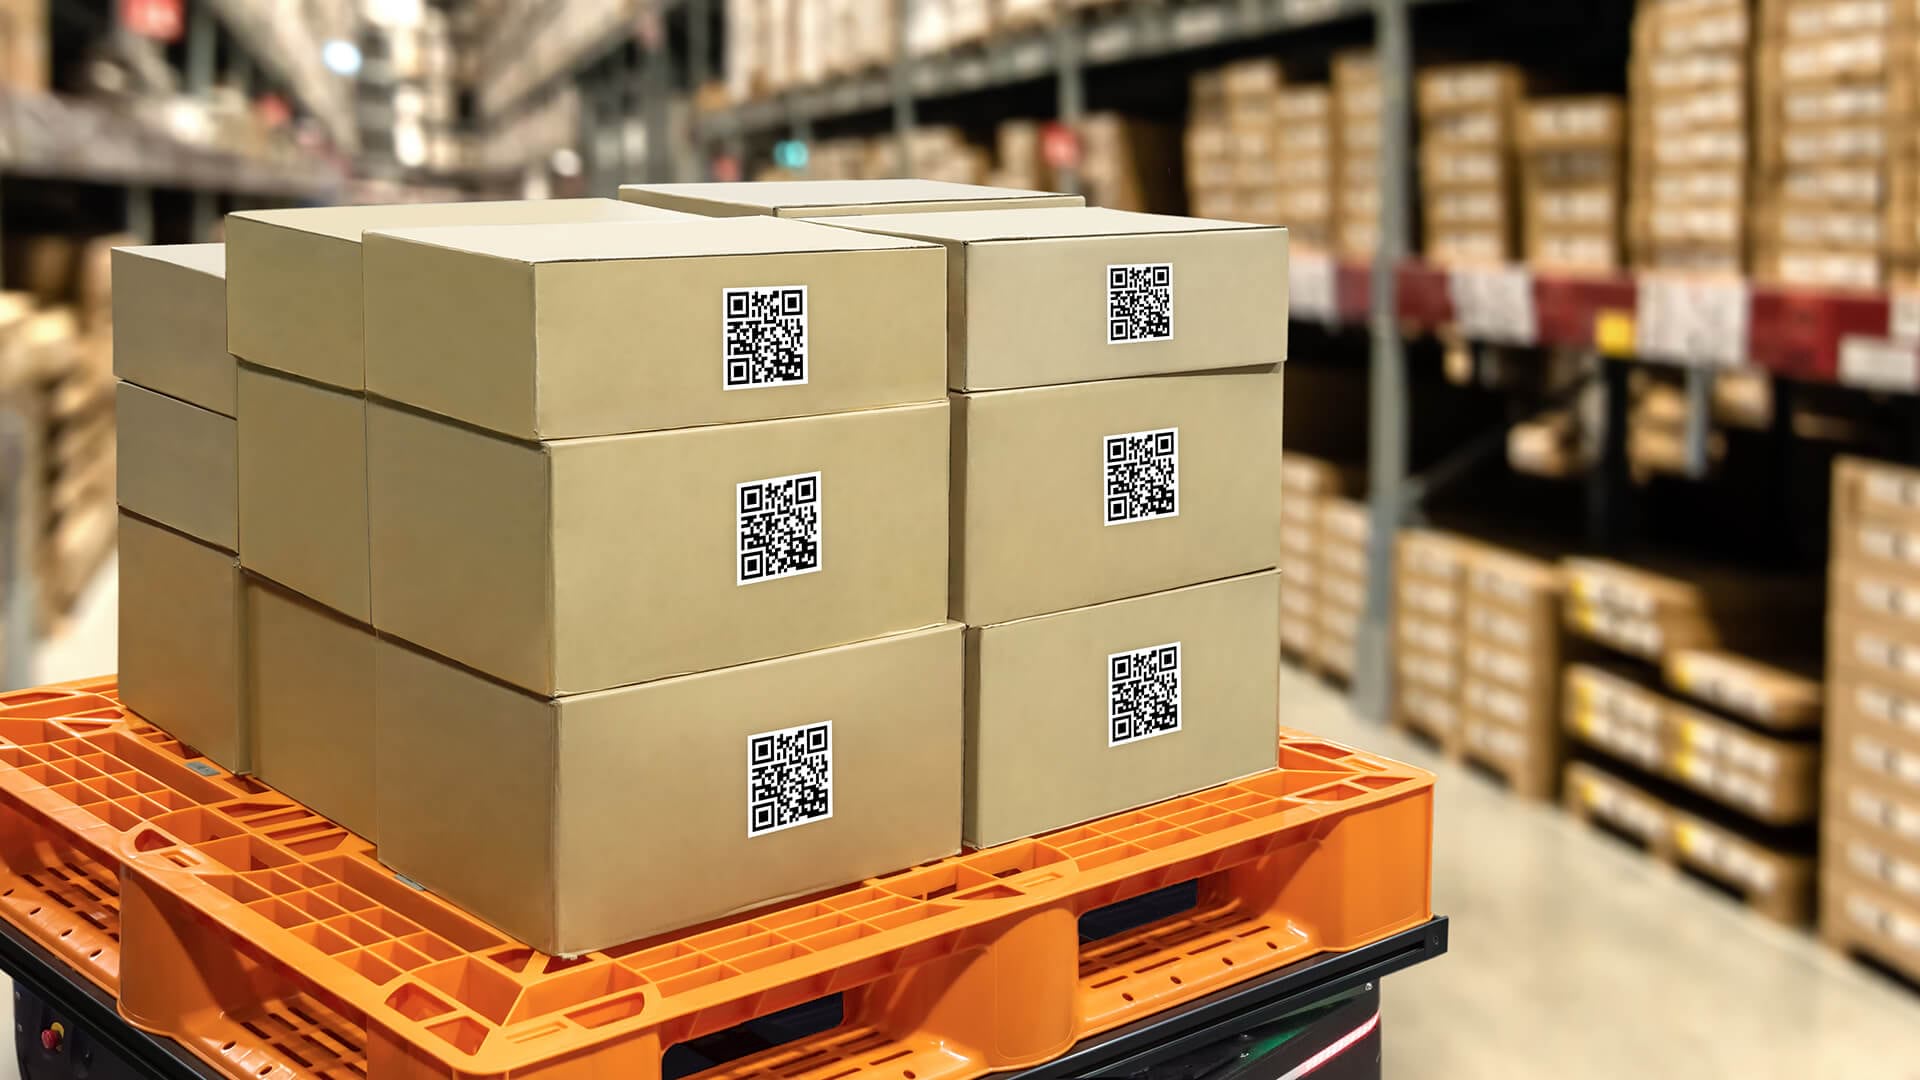 A pallet holding QR-tagged boxes represents supply chain agility